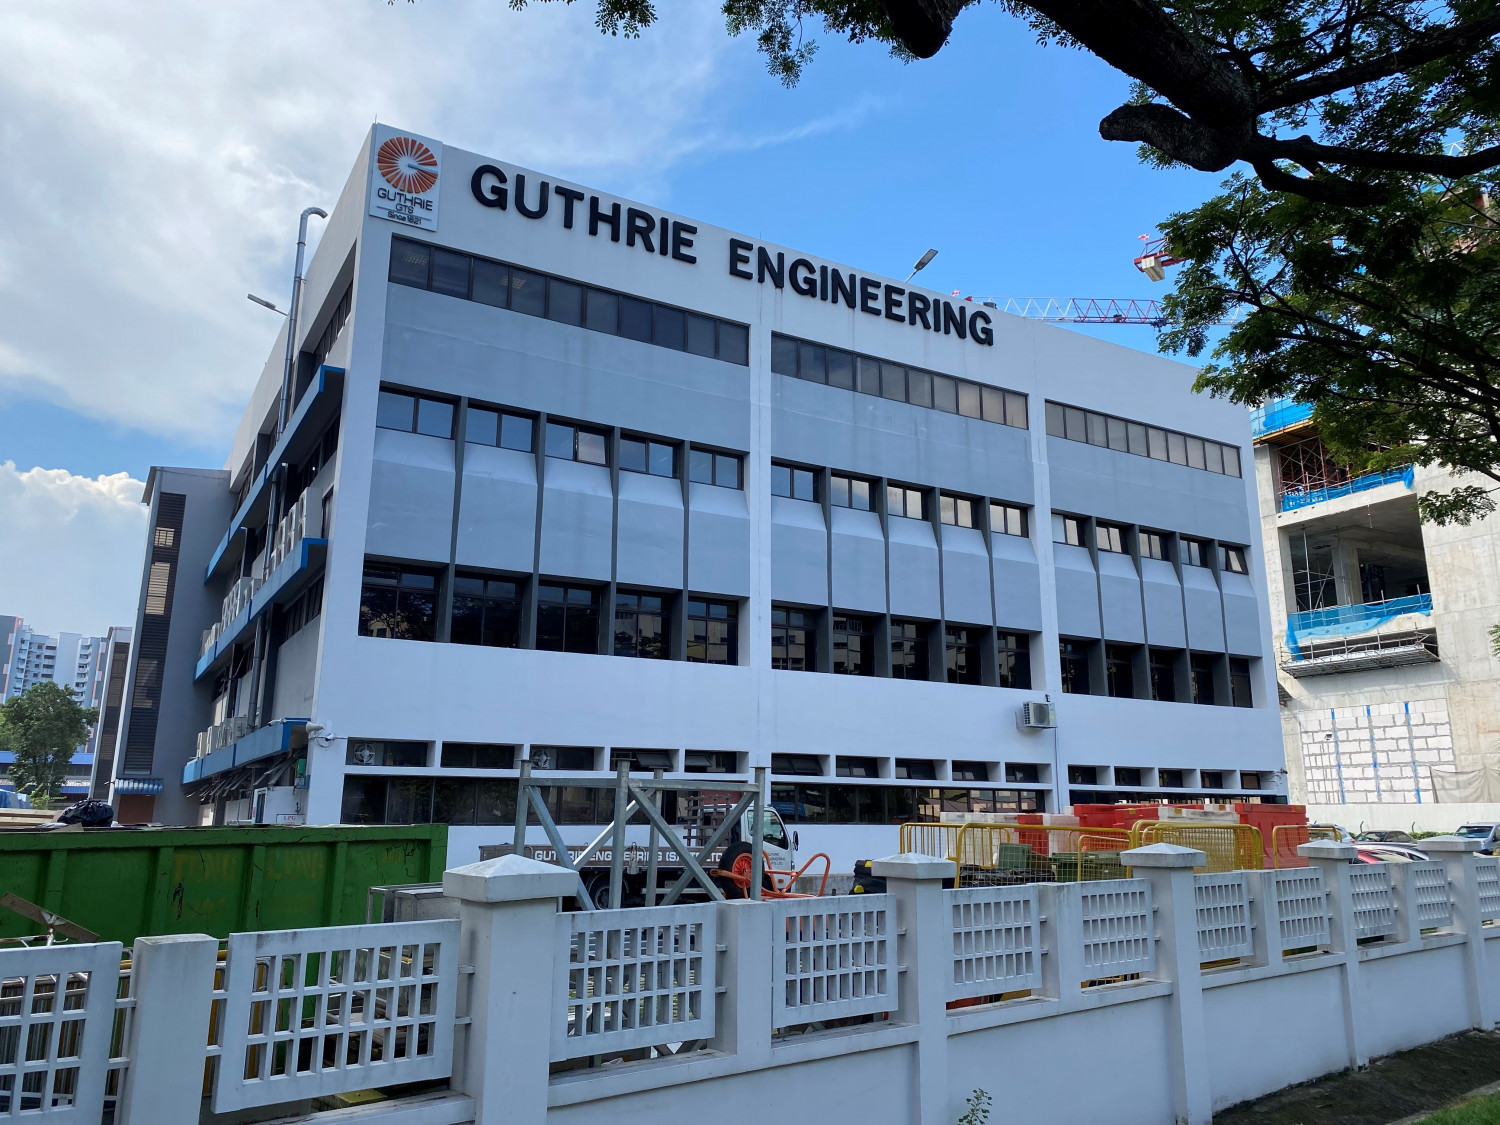 Guthrie Engineering Building for sale at $29 mil - Property News